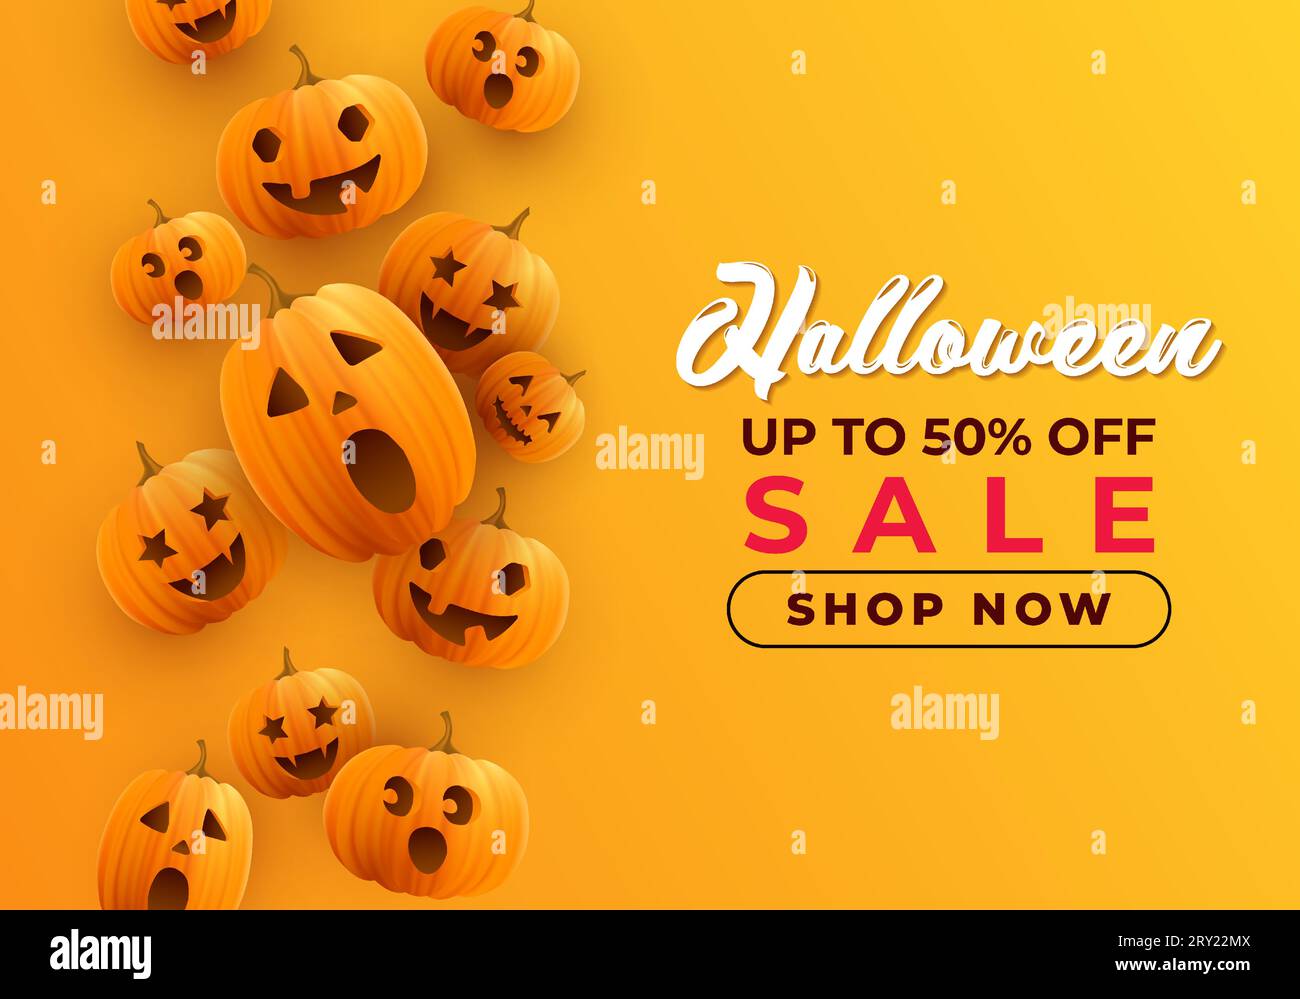 Realistic halloween horizontal sale promotion banner illustration with realistic pumpkins Stock Vector